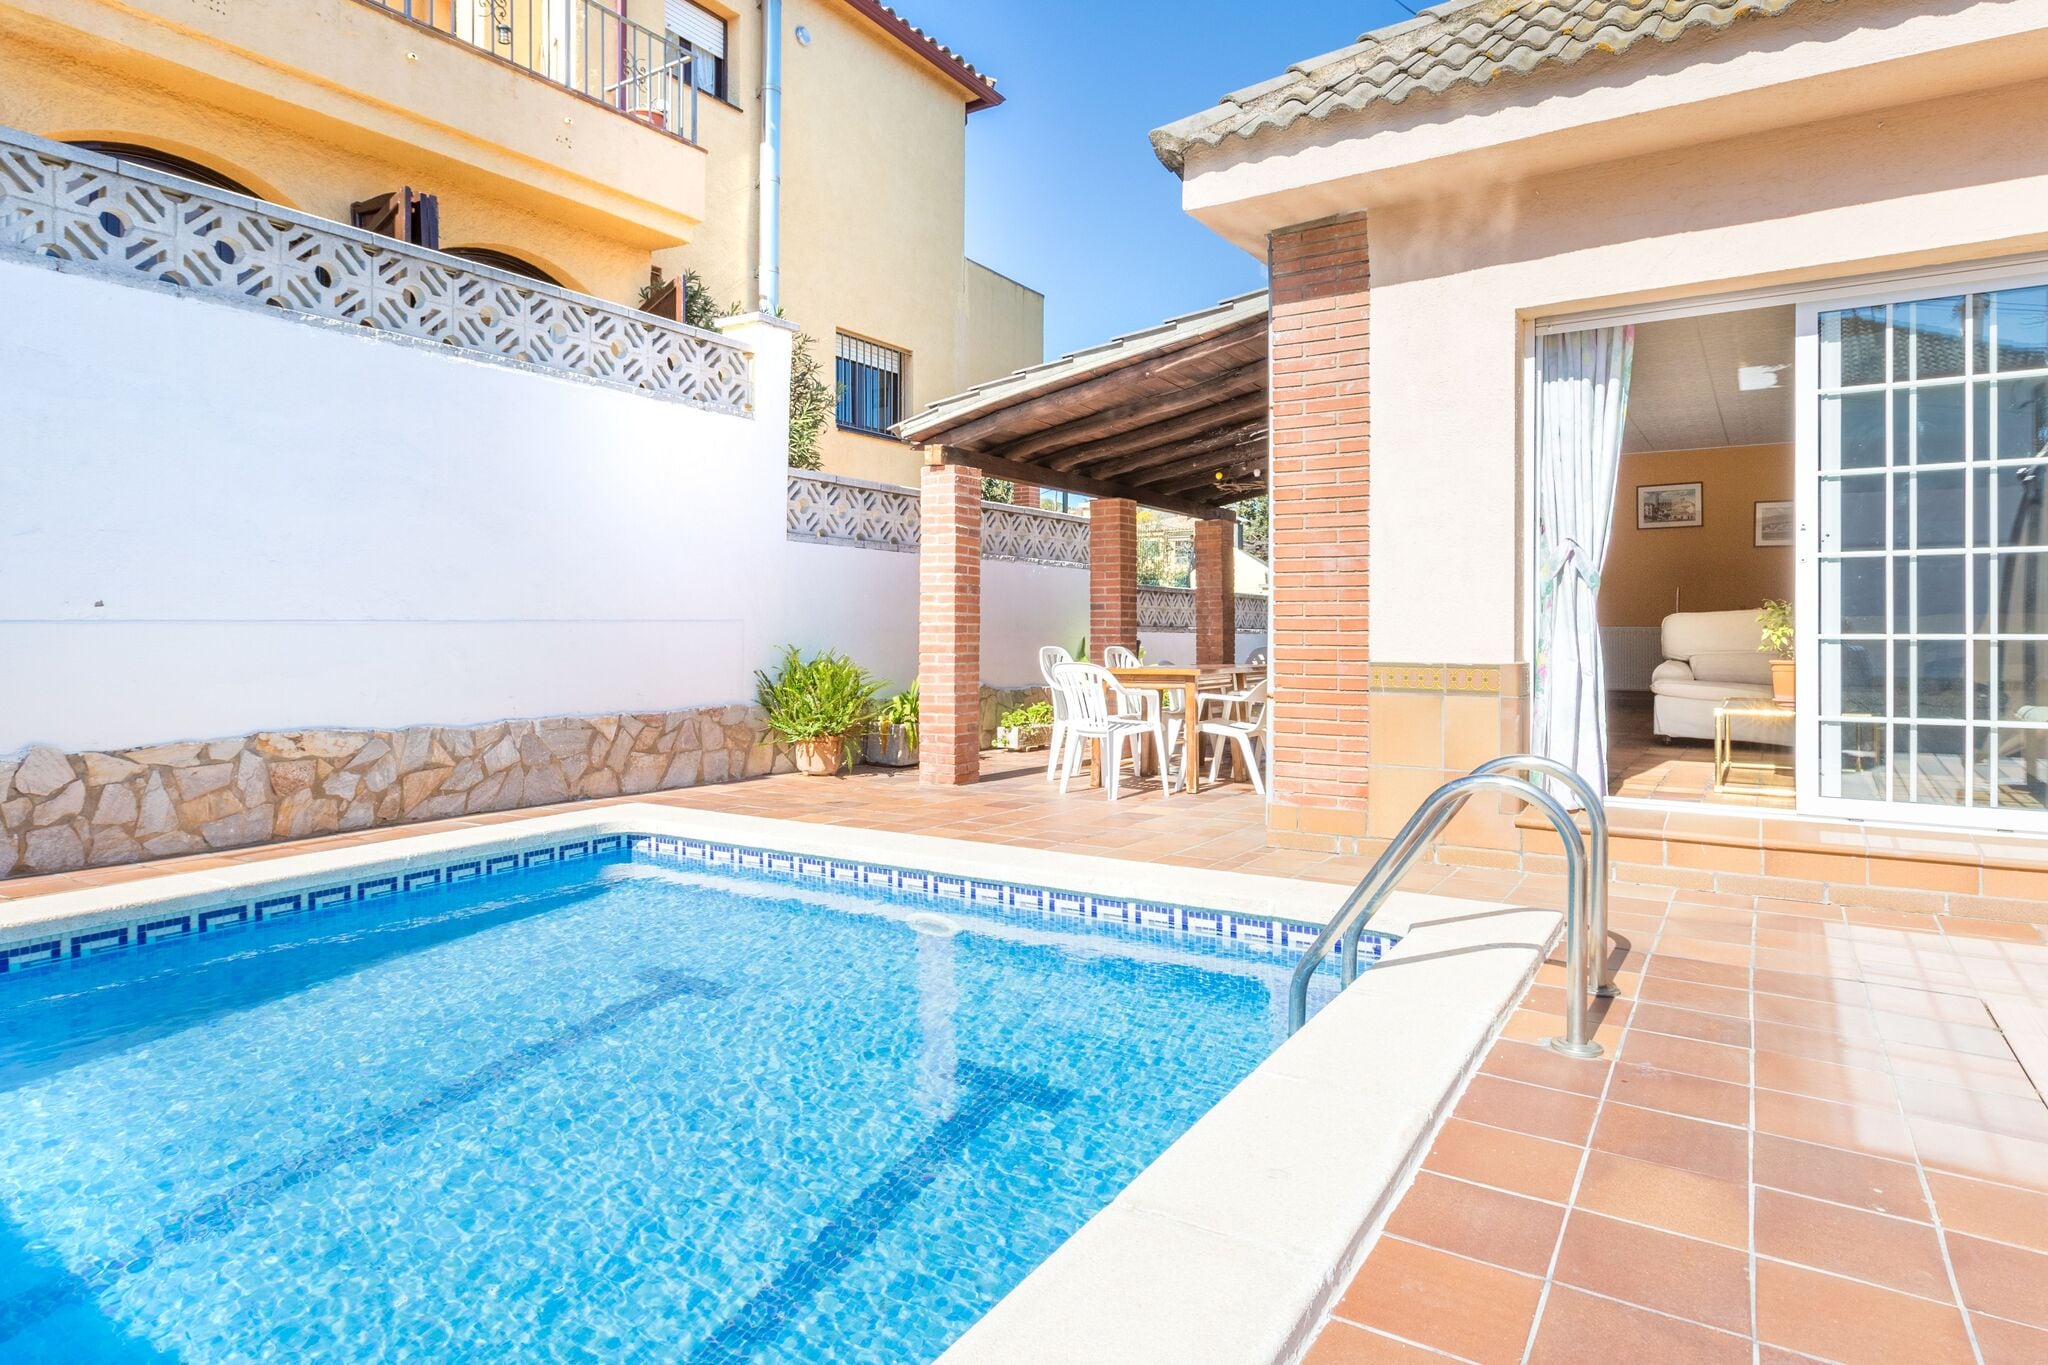 Charming 4 bedroom house in a very quiet area in Blanes